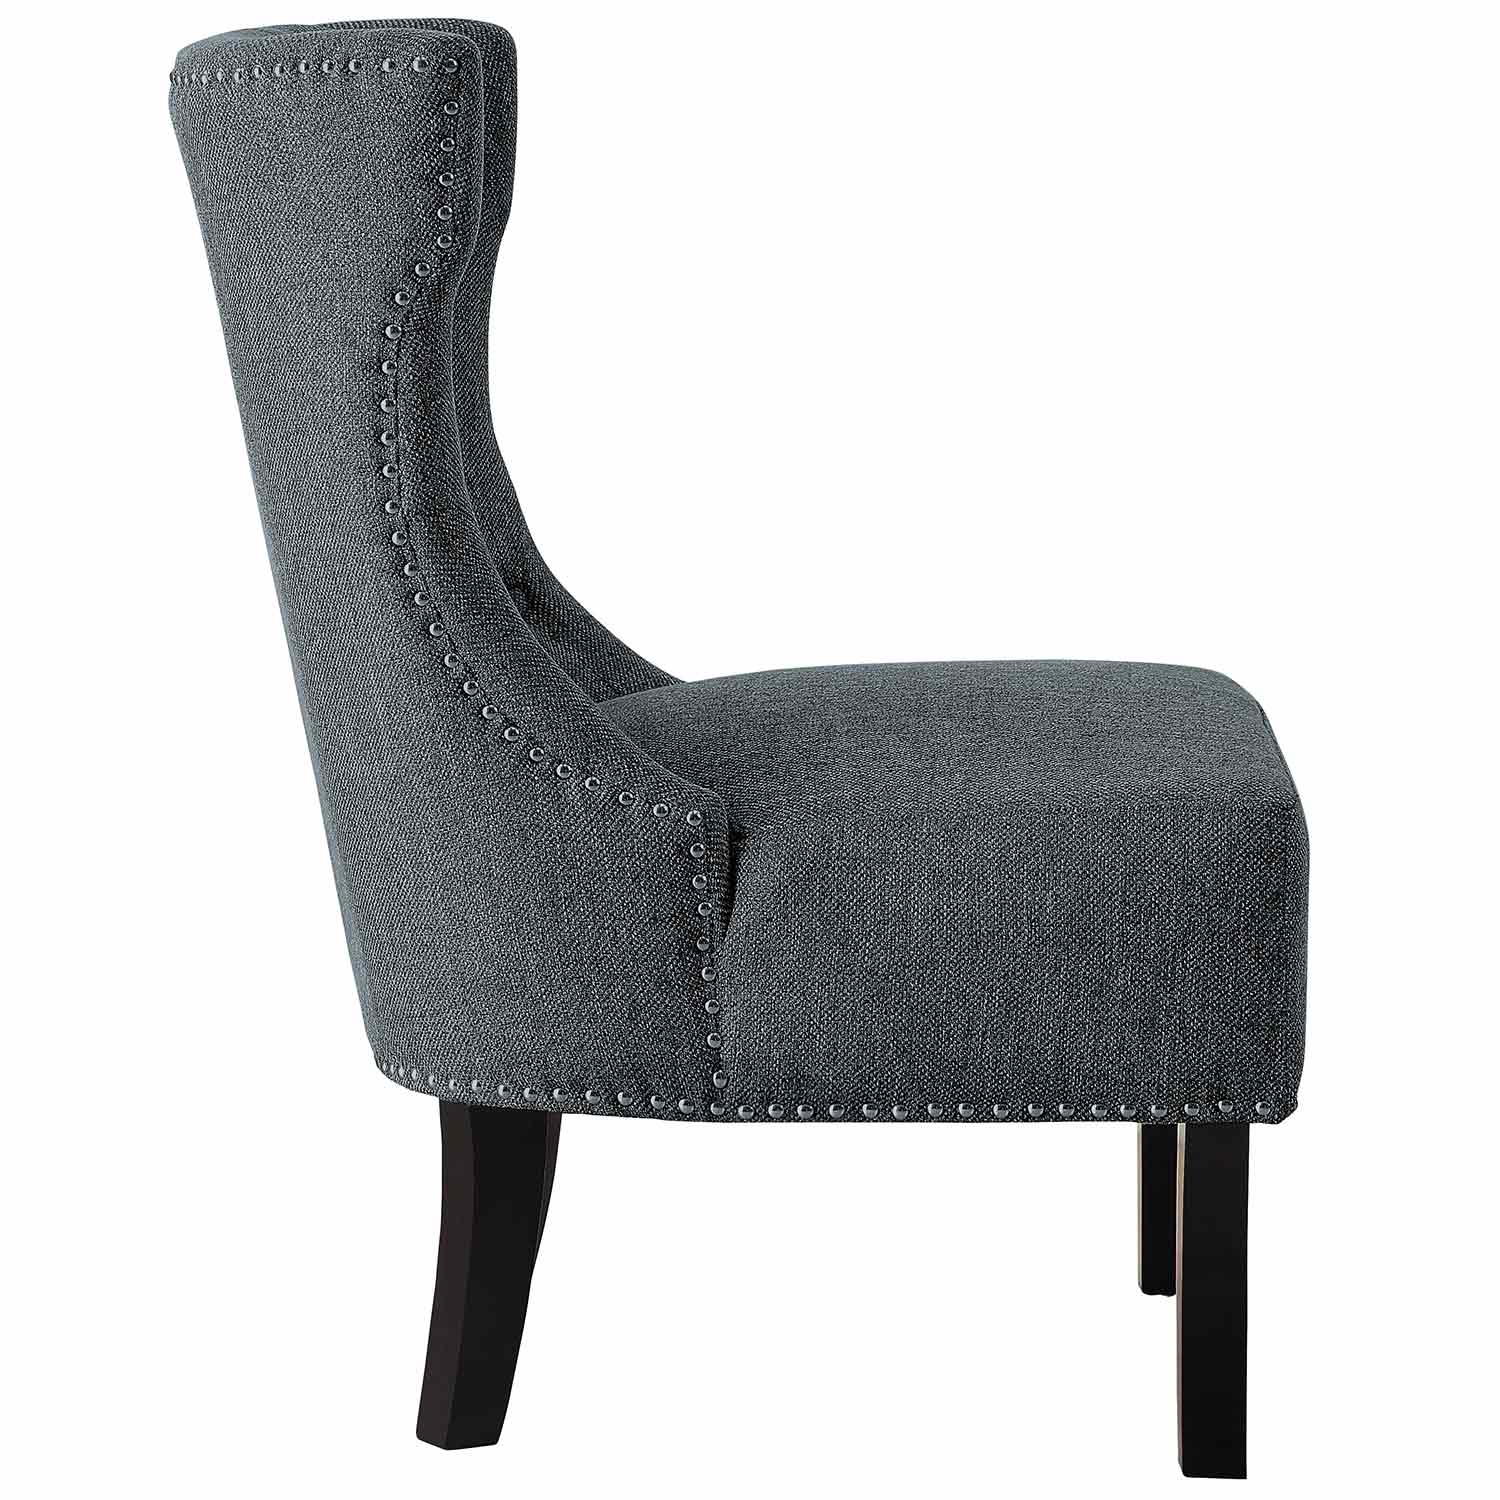 Homelegance Paighton Accent Chair - Gray